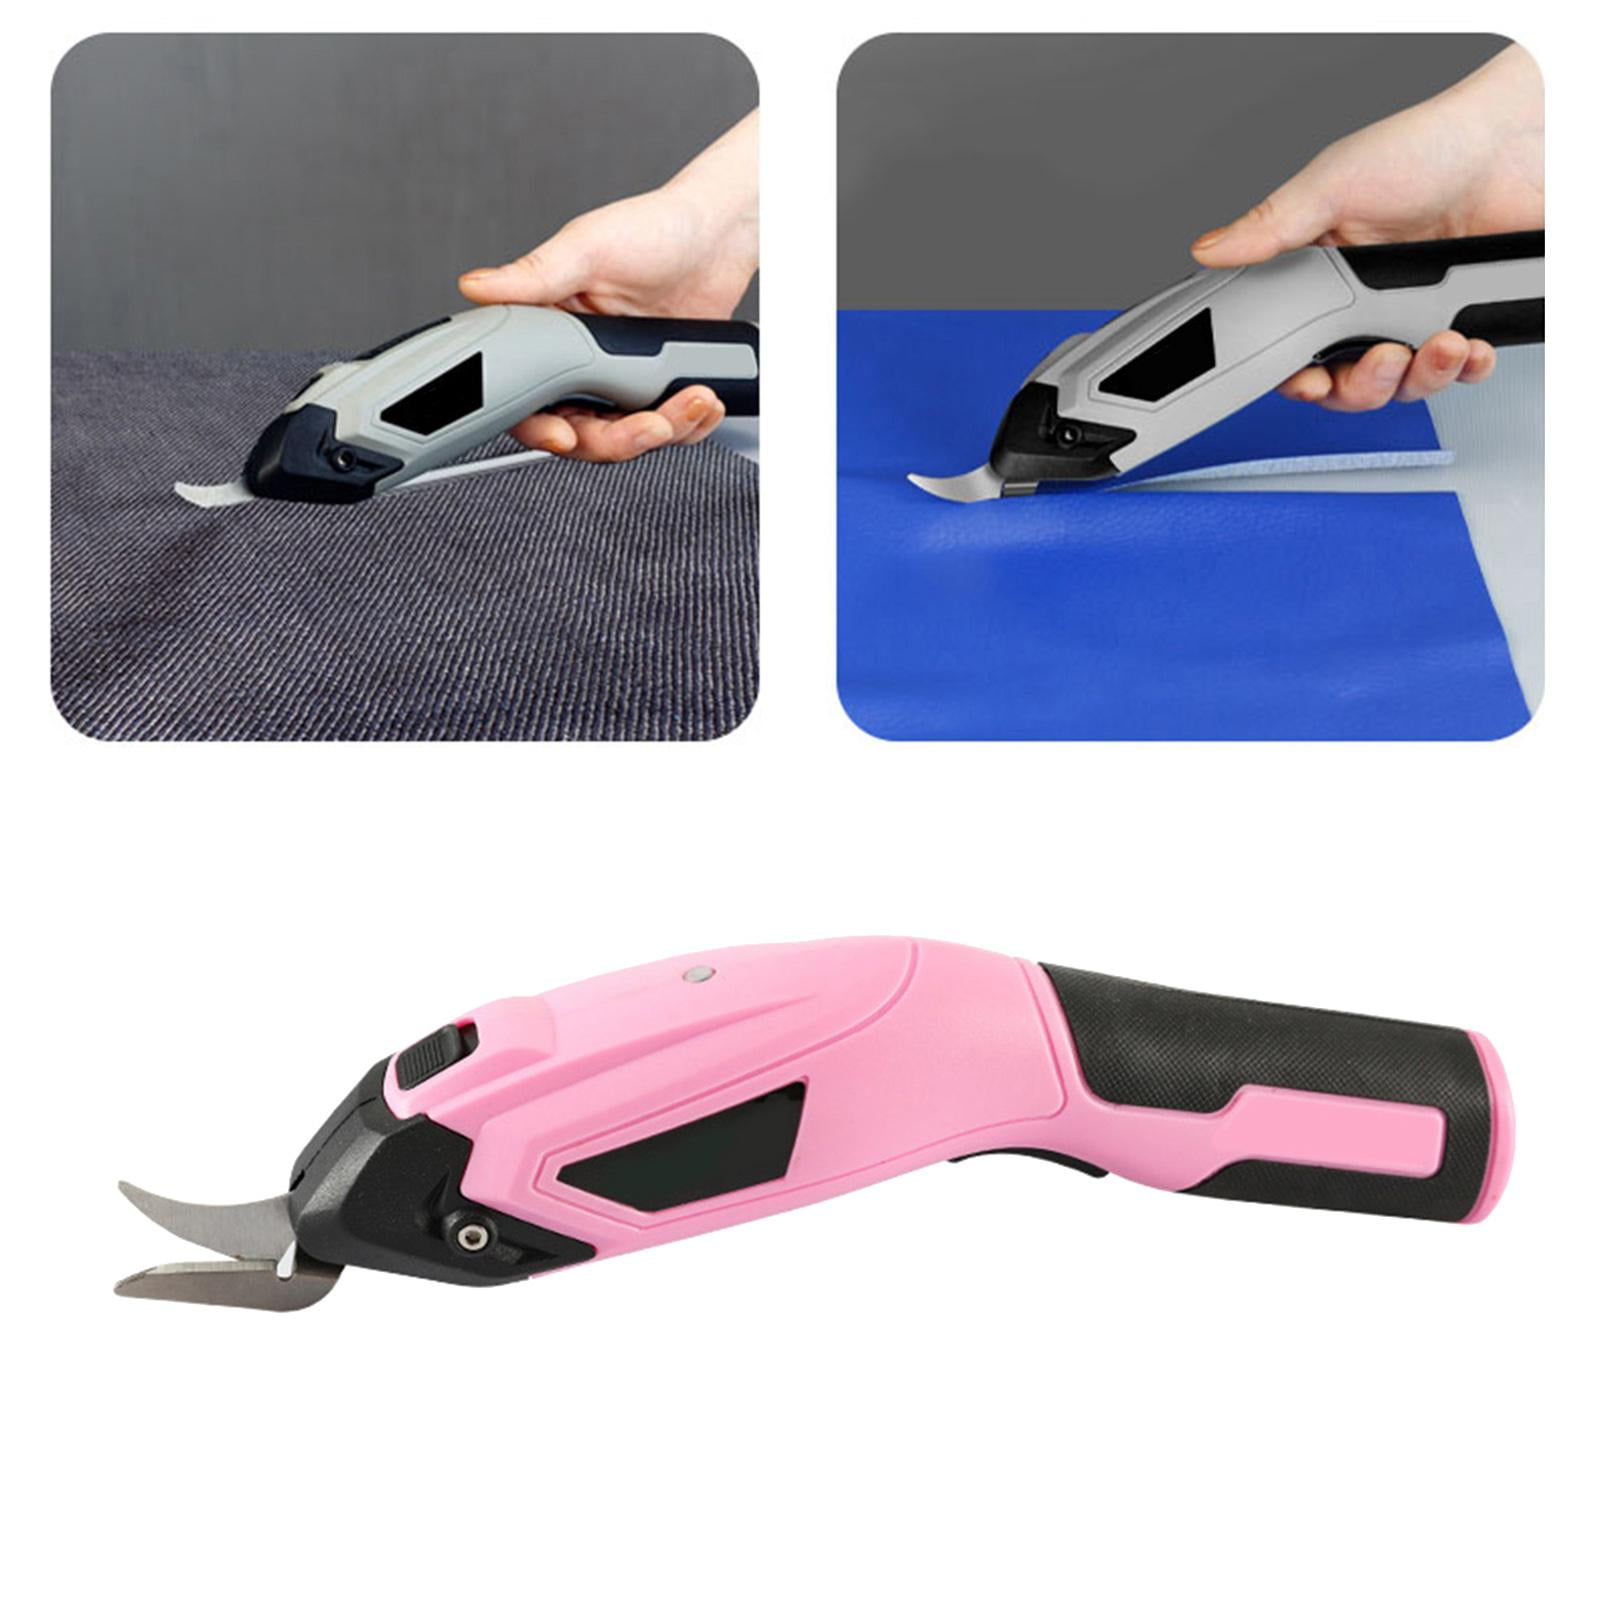 Portable Leather Usb For Tool Cutter Cutter Cardboard Cutte